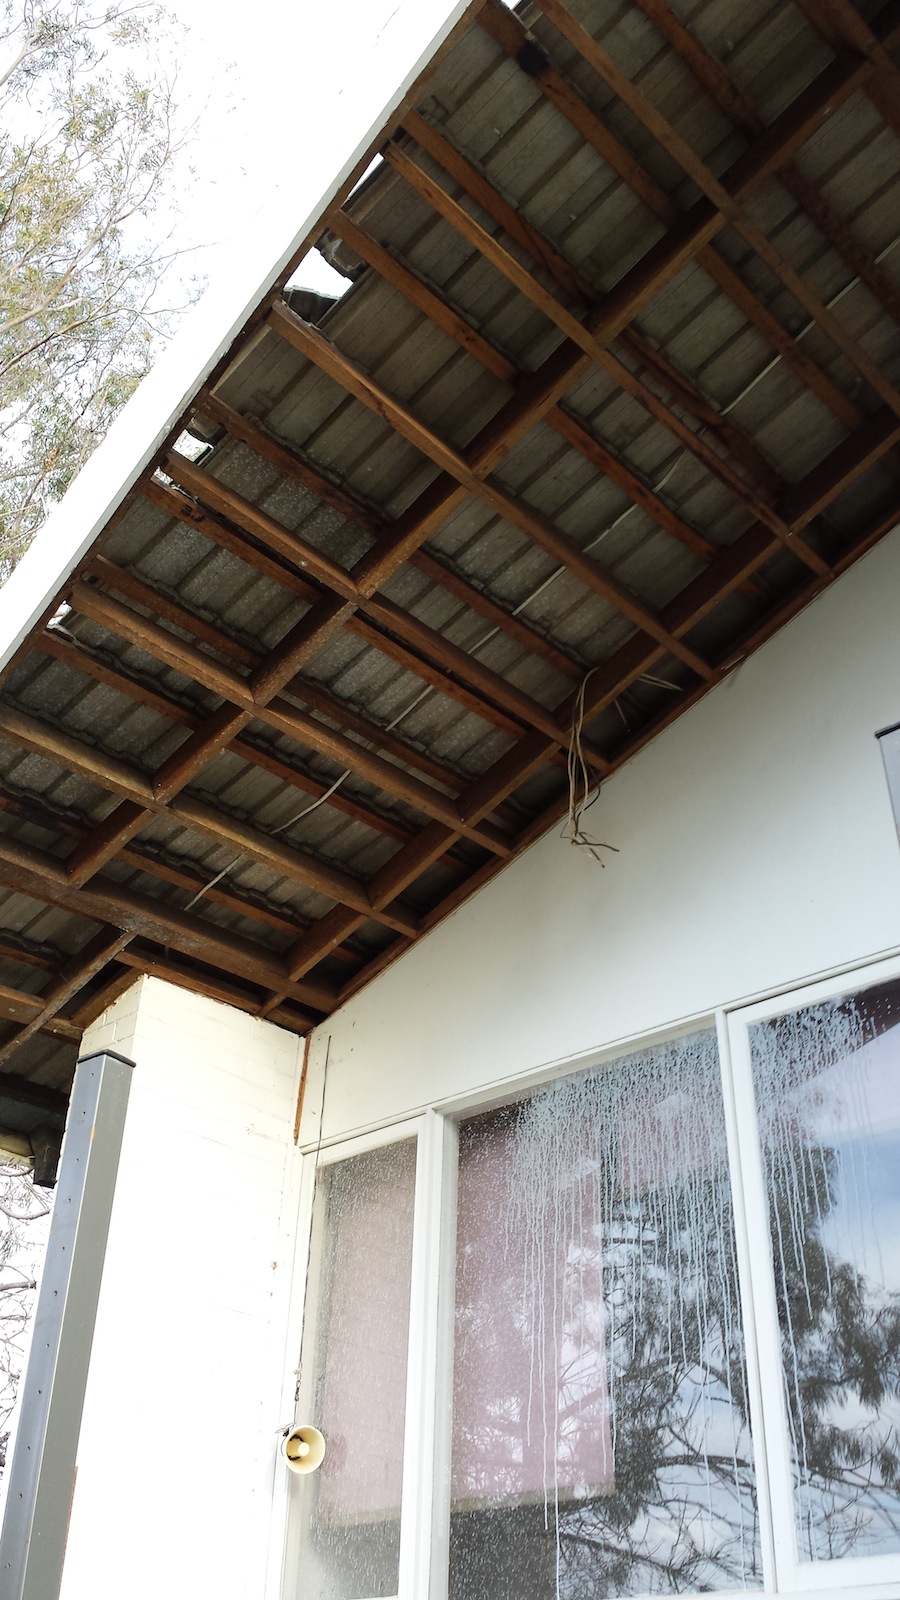 Eaves with asbestos have been removed